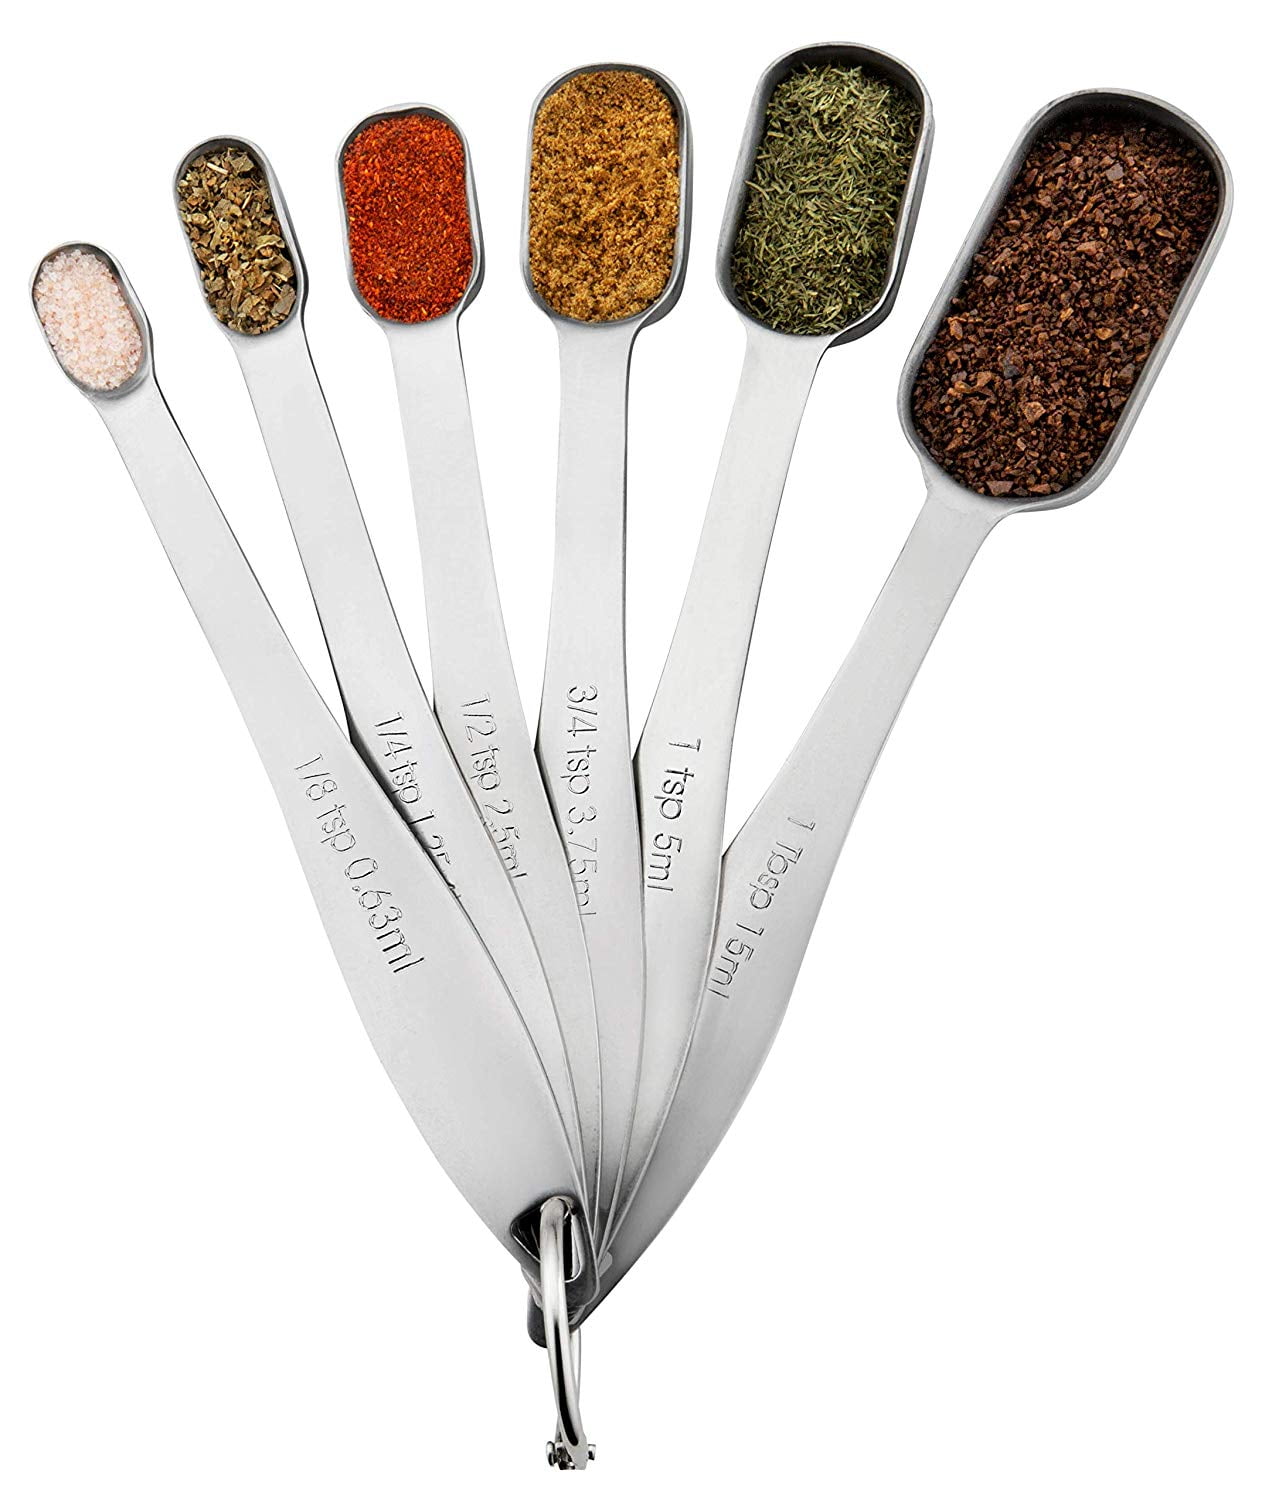 Heavy Duty Stainless Steel Measuring Spoons with Slim Design for Narrow  Spice Jars, 6 Piece Measuring, Teaspoon Measuring Spoon - AliExpress